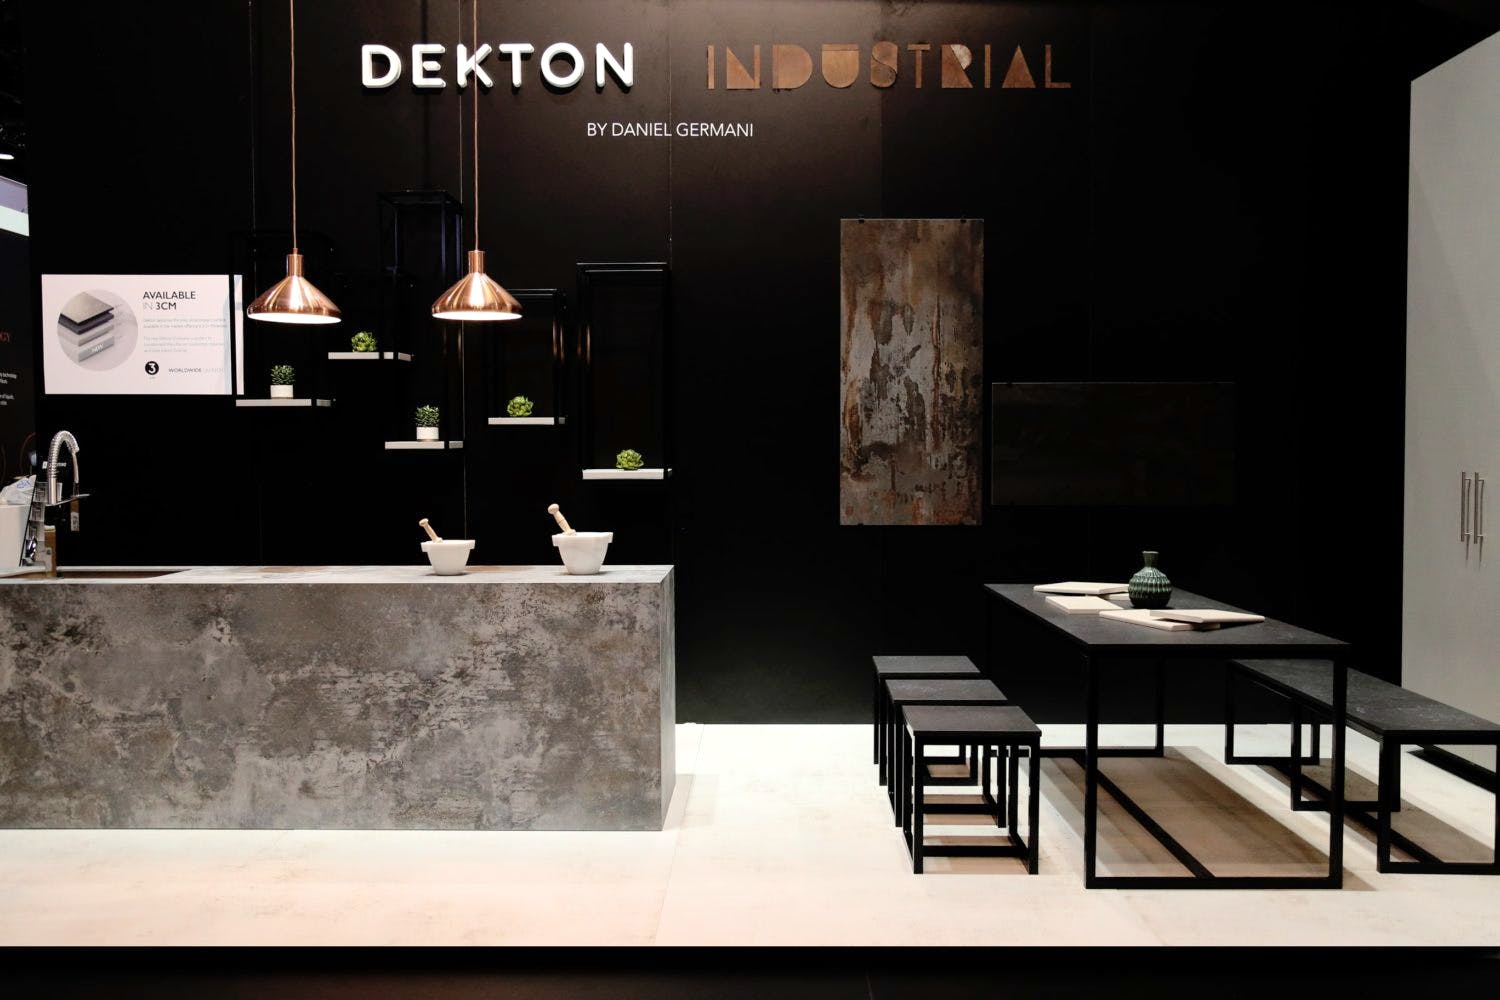 Image of Dekton Industrial Stand Cosentino KBIS 2018 lr 1500x1000 6 in The Cosentino Group meets with its best stonemason customers from Spain and Portugal in Almeria - Cosentino